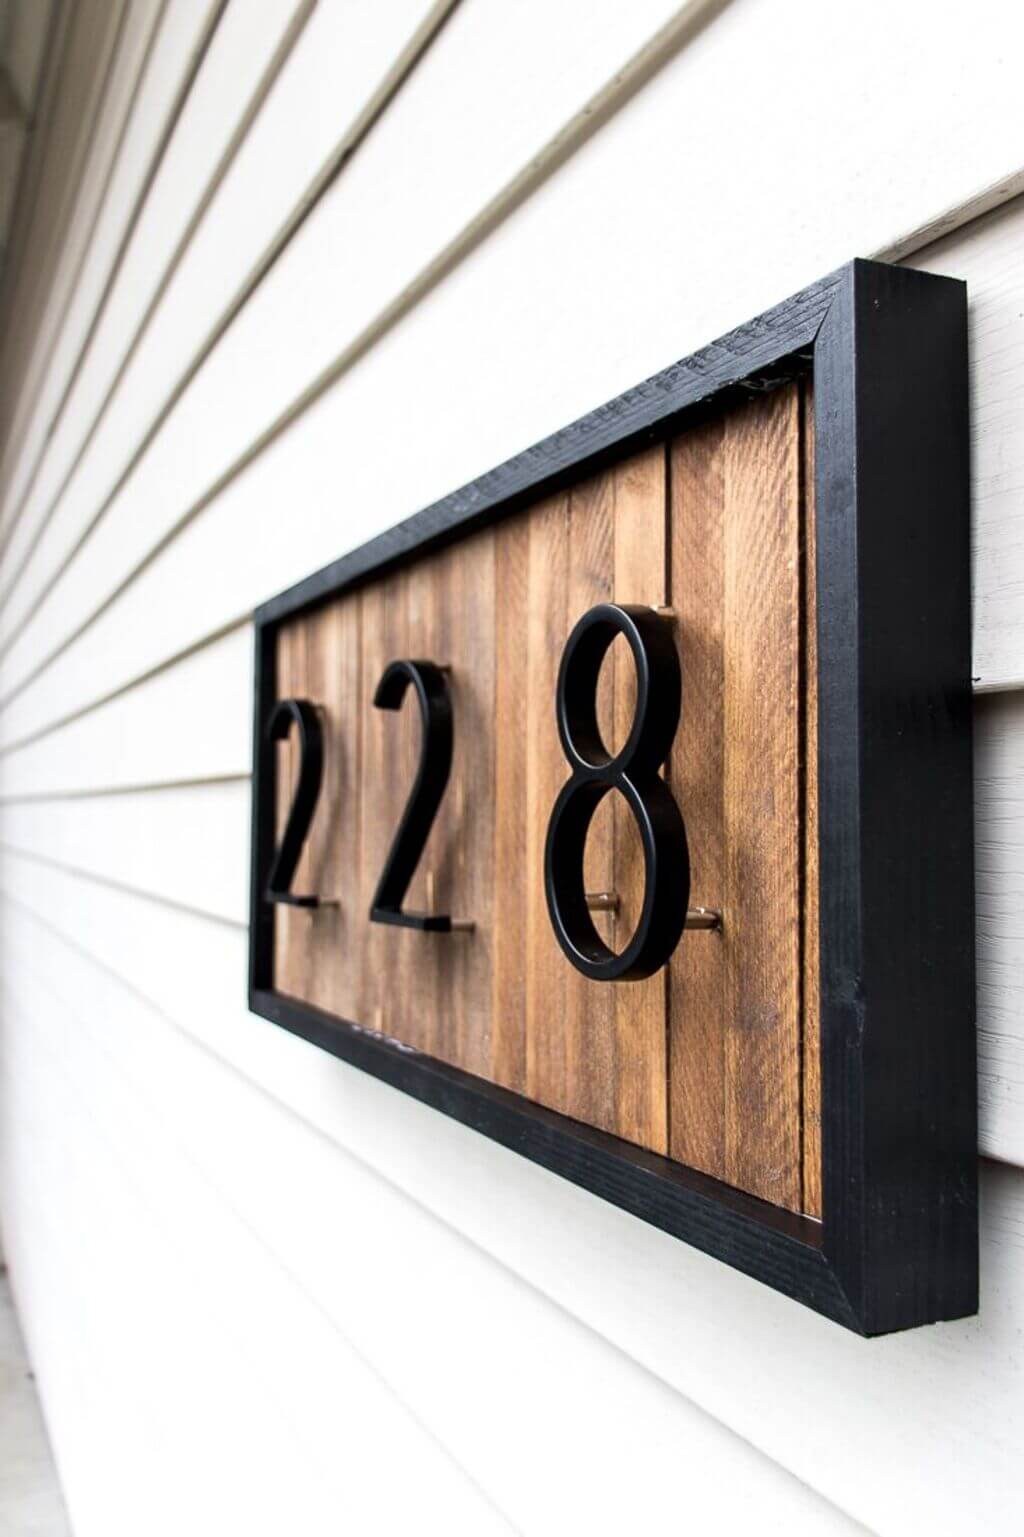 Textured Canvas for House Numbers sign idea